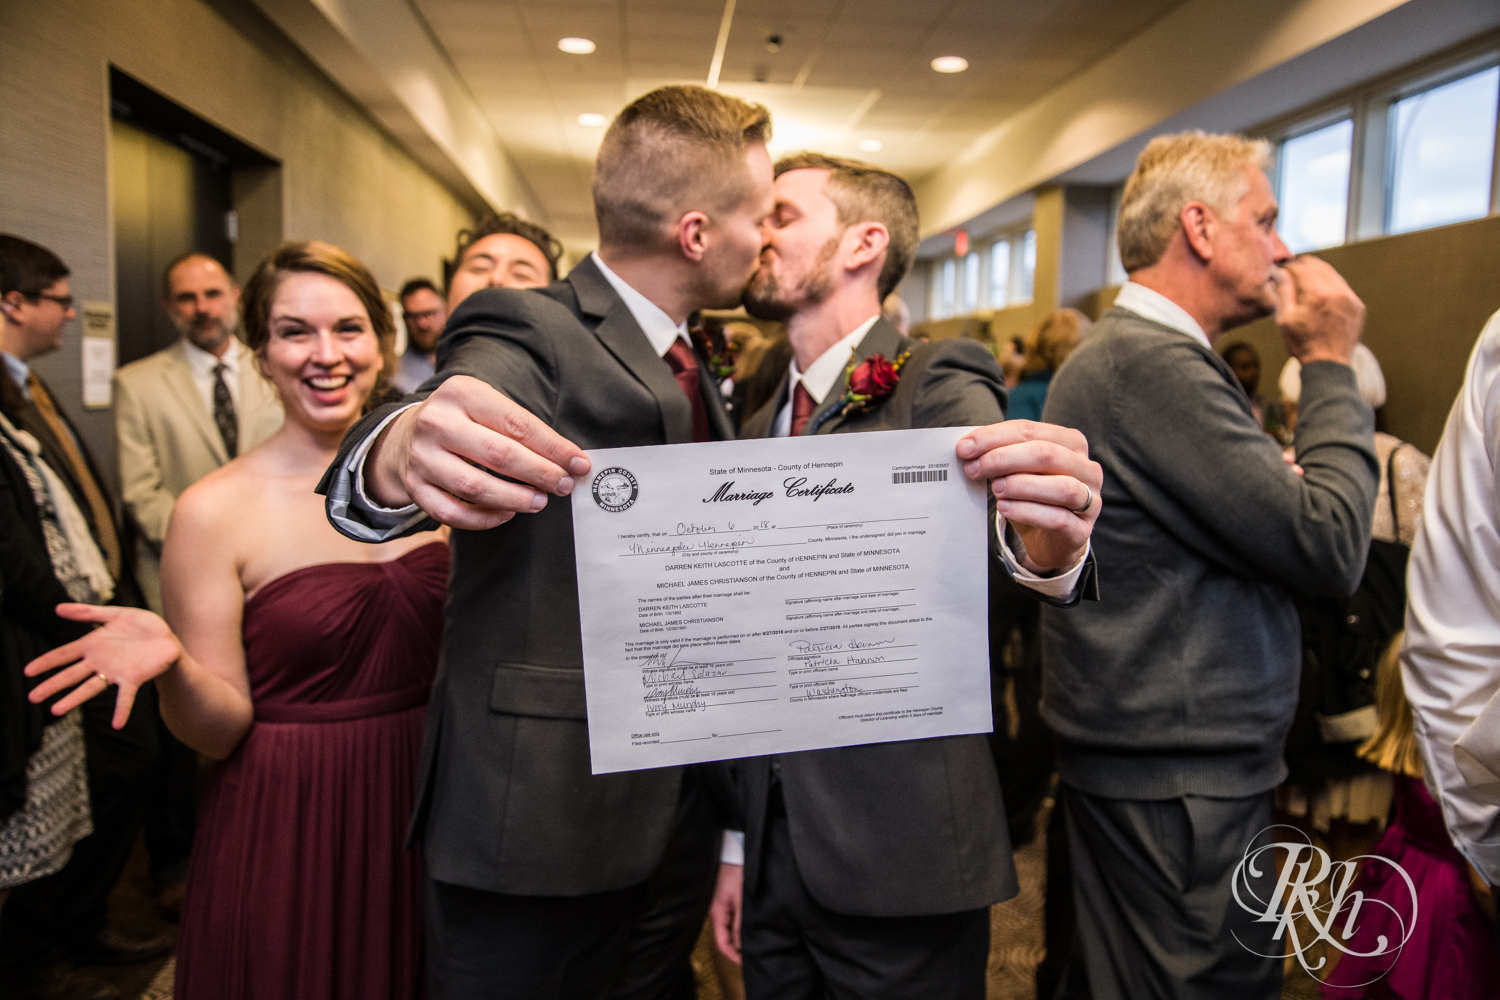 Grooms kiss after LGBTQ wedding ceremony at Courtyard by Marriott Minneapolis.